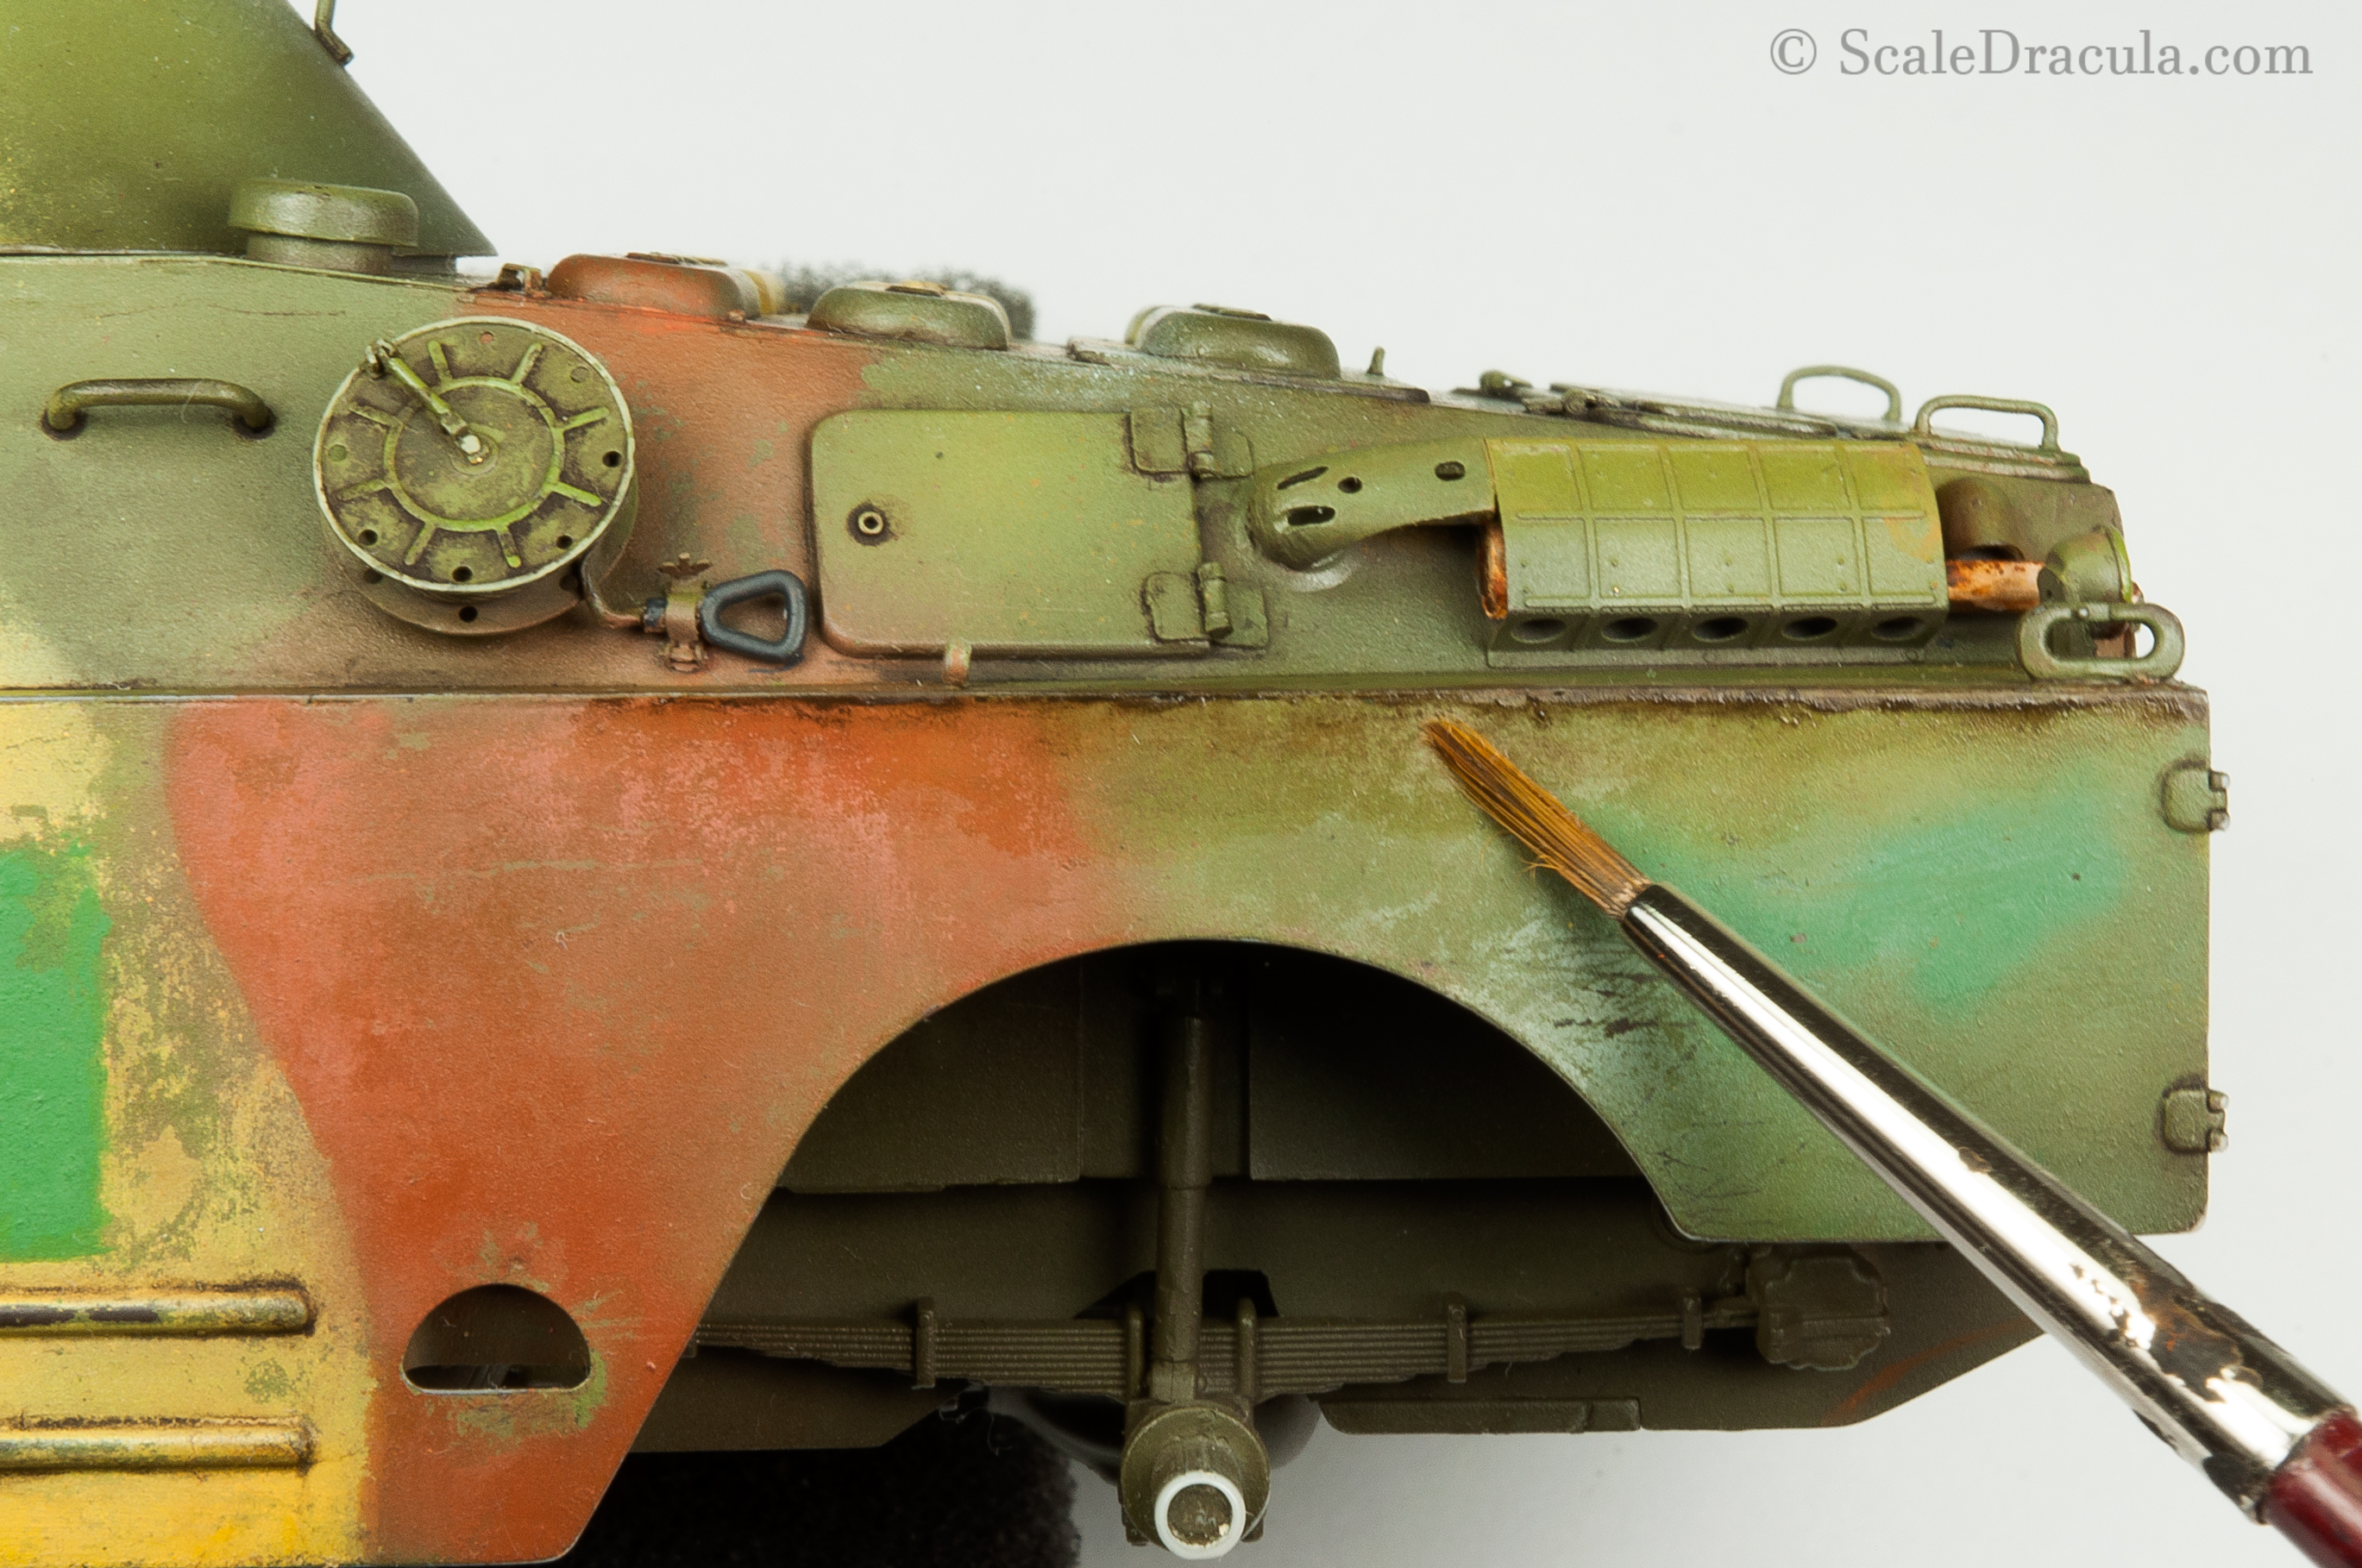 Weathering with oils, BRDM-2 by Trumpeter